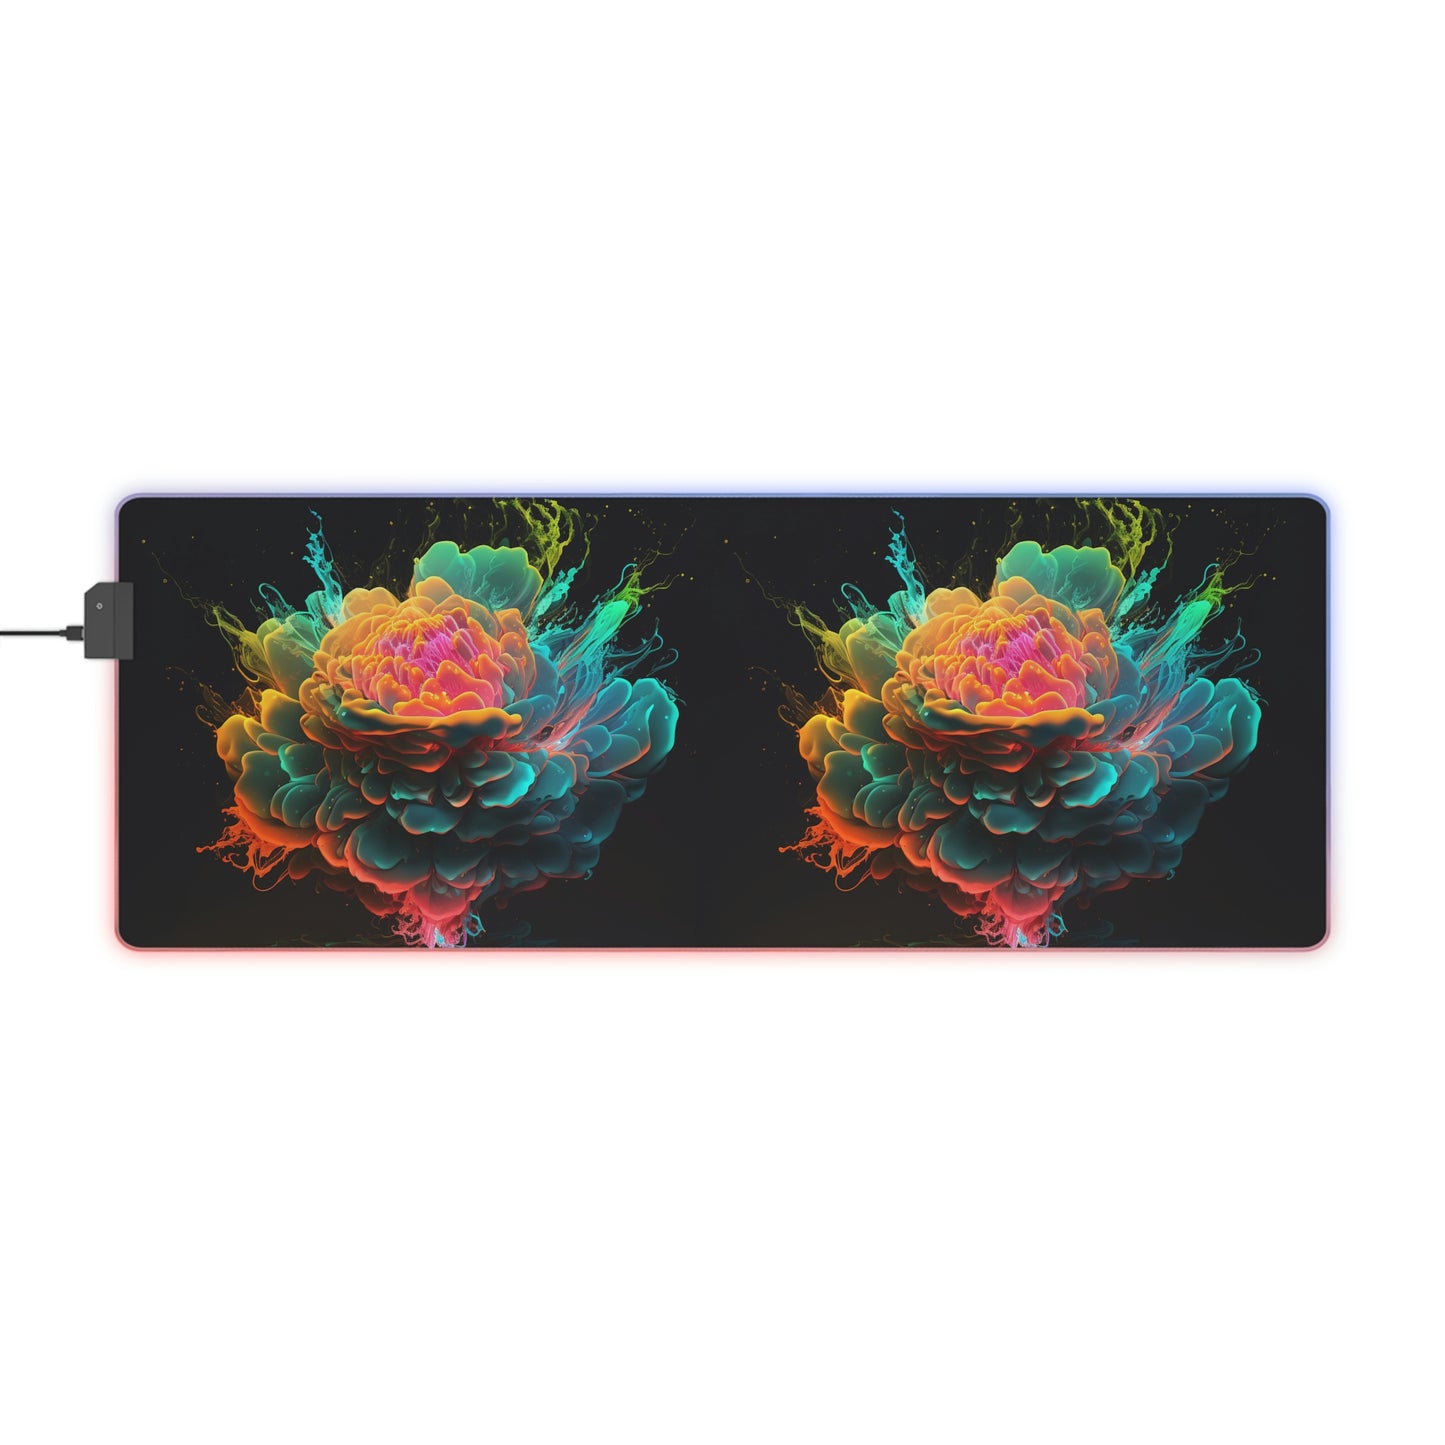 LED Gaming Mouse Pad Florescent Explosion 1